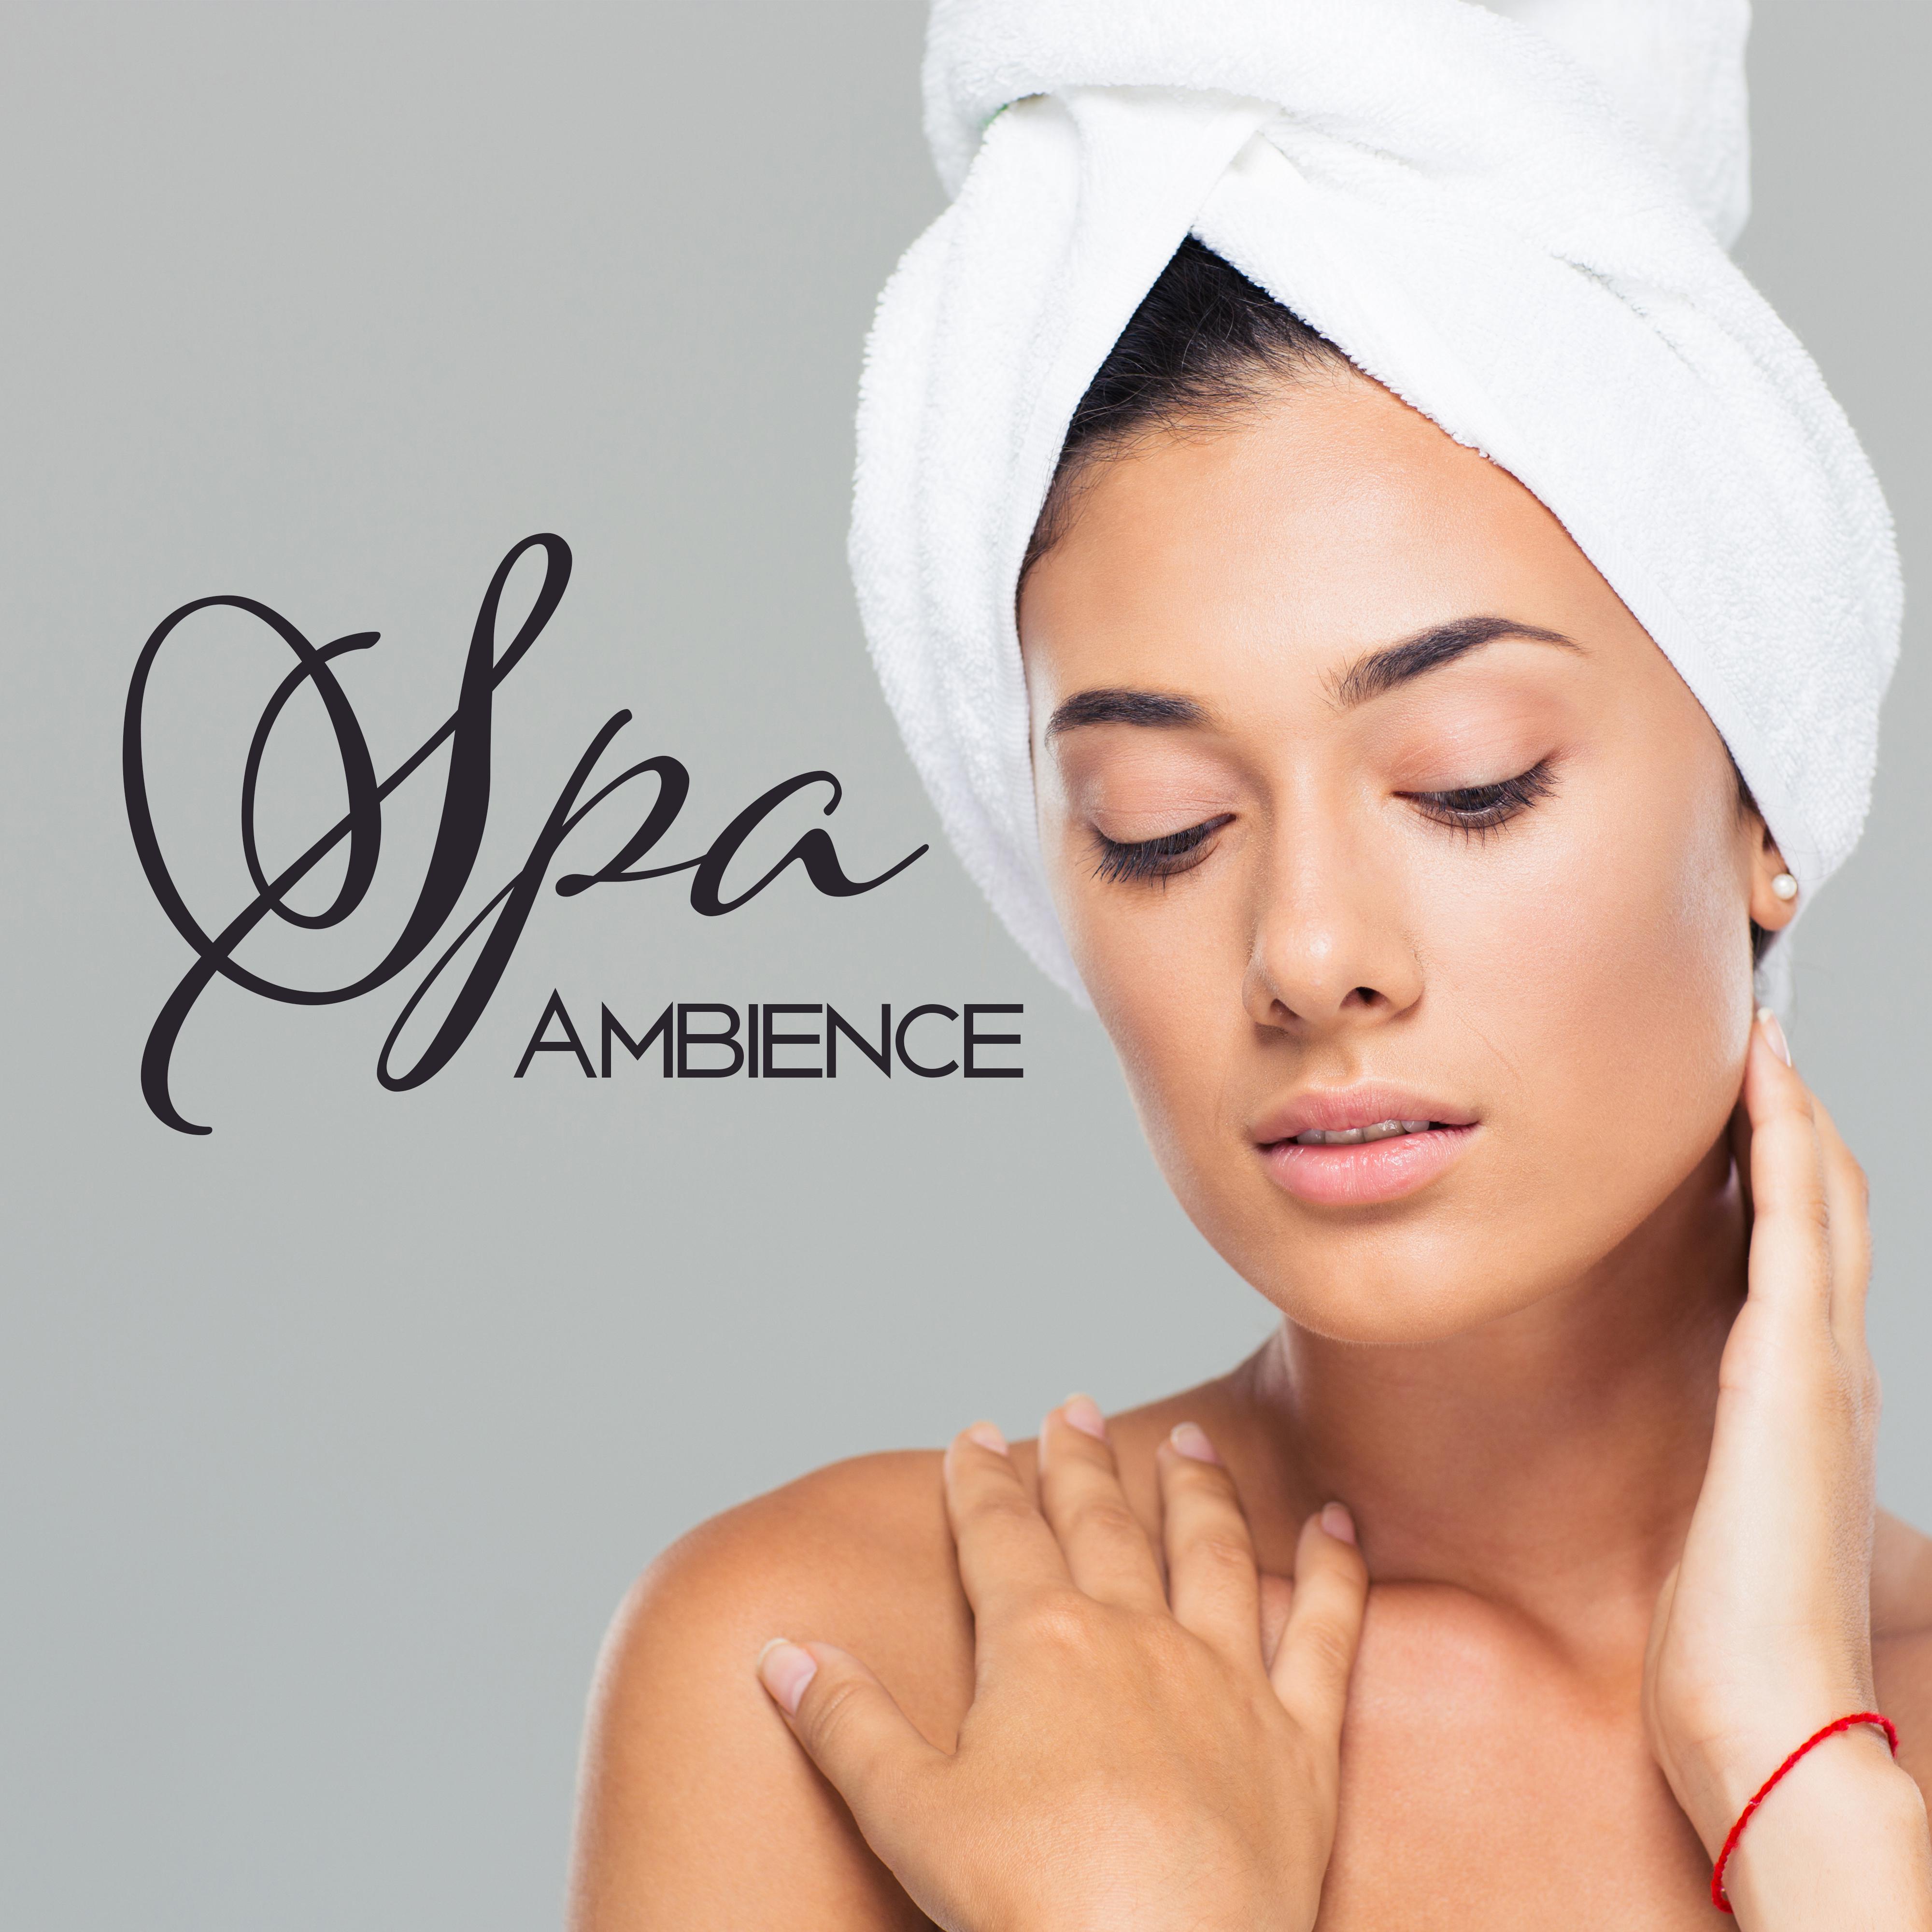 Spa Ambience  Relax with Nature Sounds, Spa  Wellness, Massage, Beauty Treatments